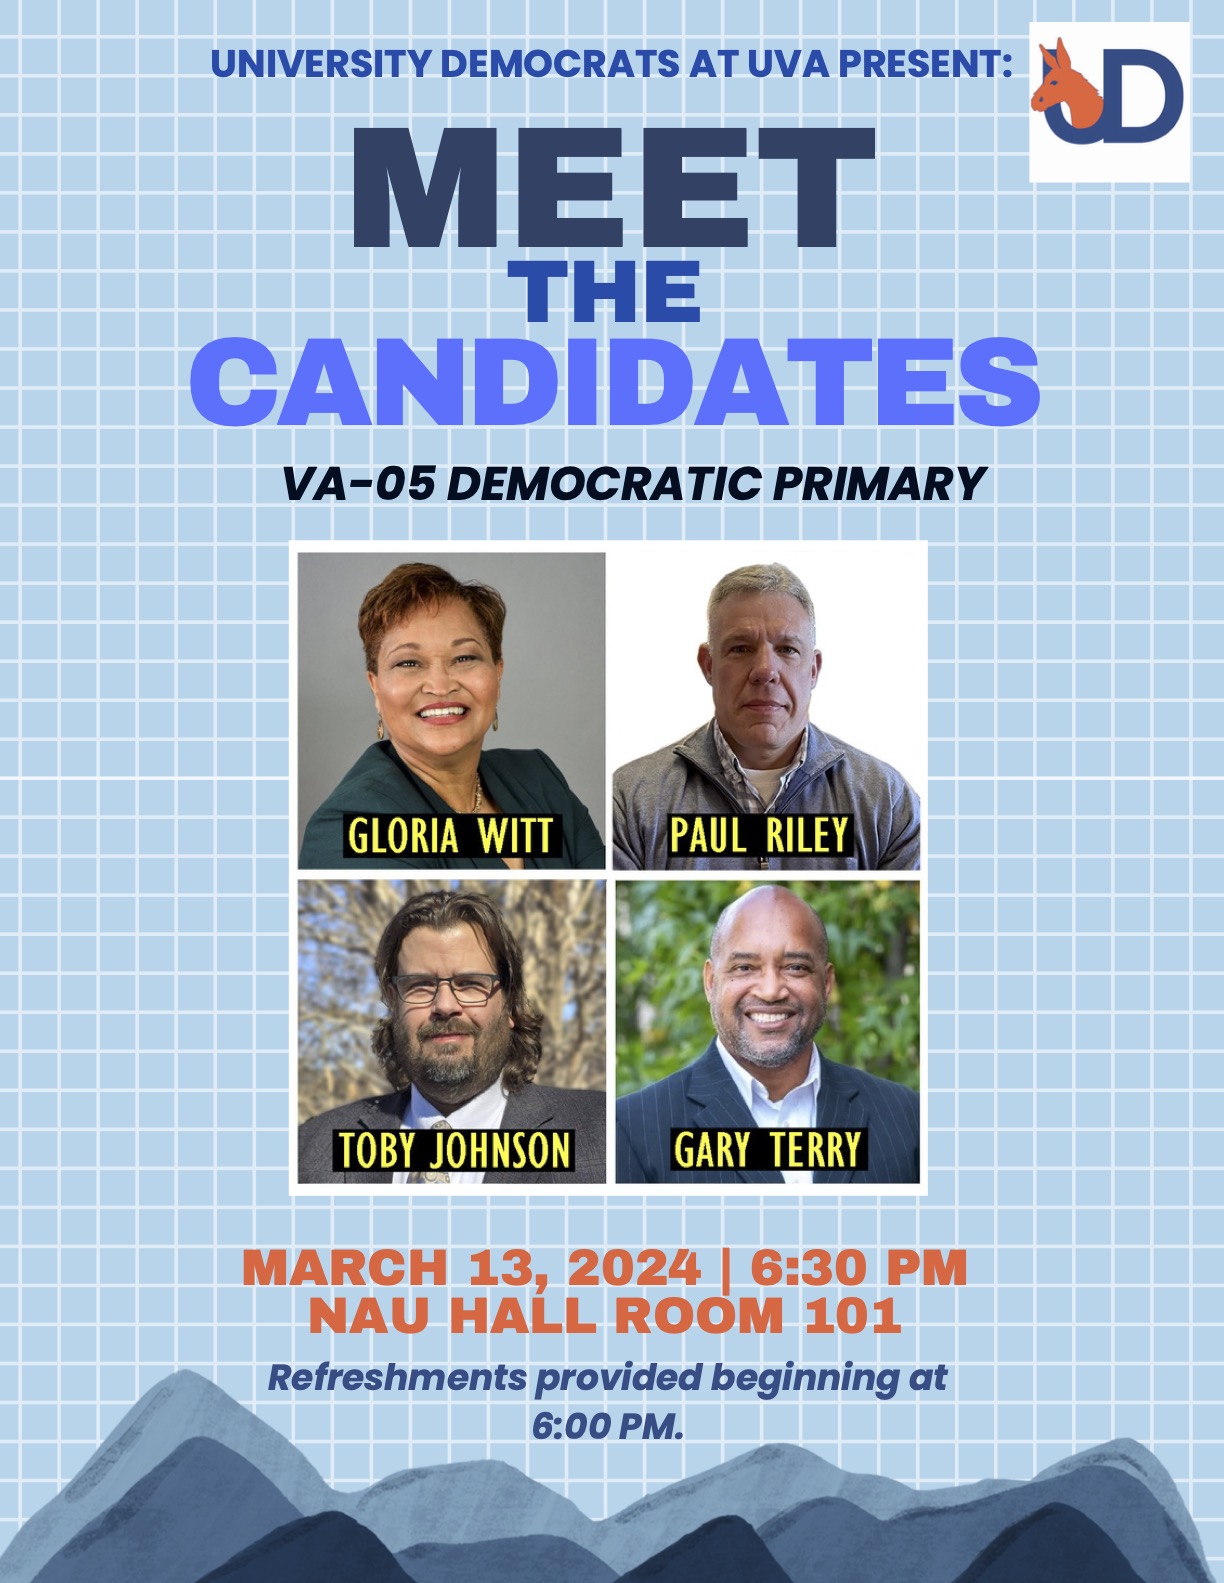 Flyer for the UDems "Meet the Candidates" event with pictures of the four candidates (Gloria Witt, Paul, Riley, Toby, Johnson, and Gary Terry) in the center set against a background grid of sky blue squares with white lines. The headline is "University Democrats at UVA present meet the candidates: VA 05 Democratic Primary " and it gives date and time and directions.